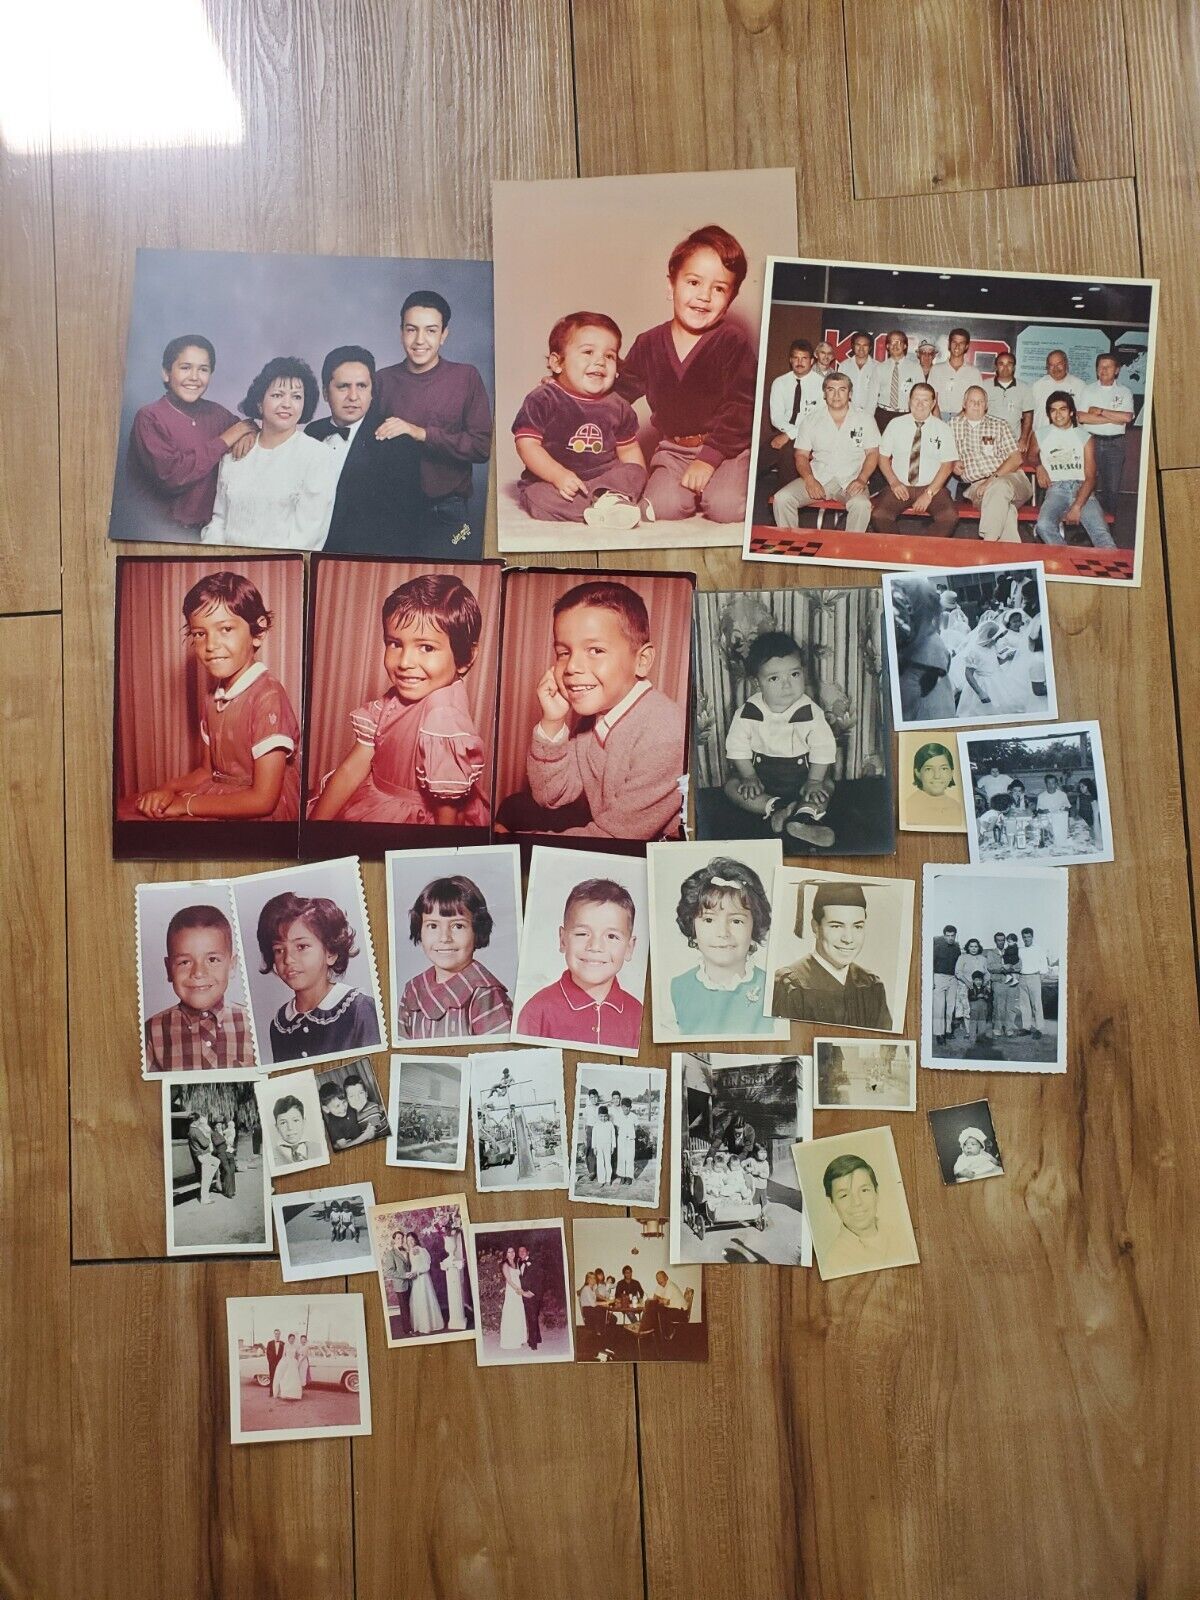 FOUND VINTAGE LOT OF 30 MEXICAN AMERICAN CHICANO FAMILY PHOTOS 1930-1990